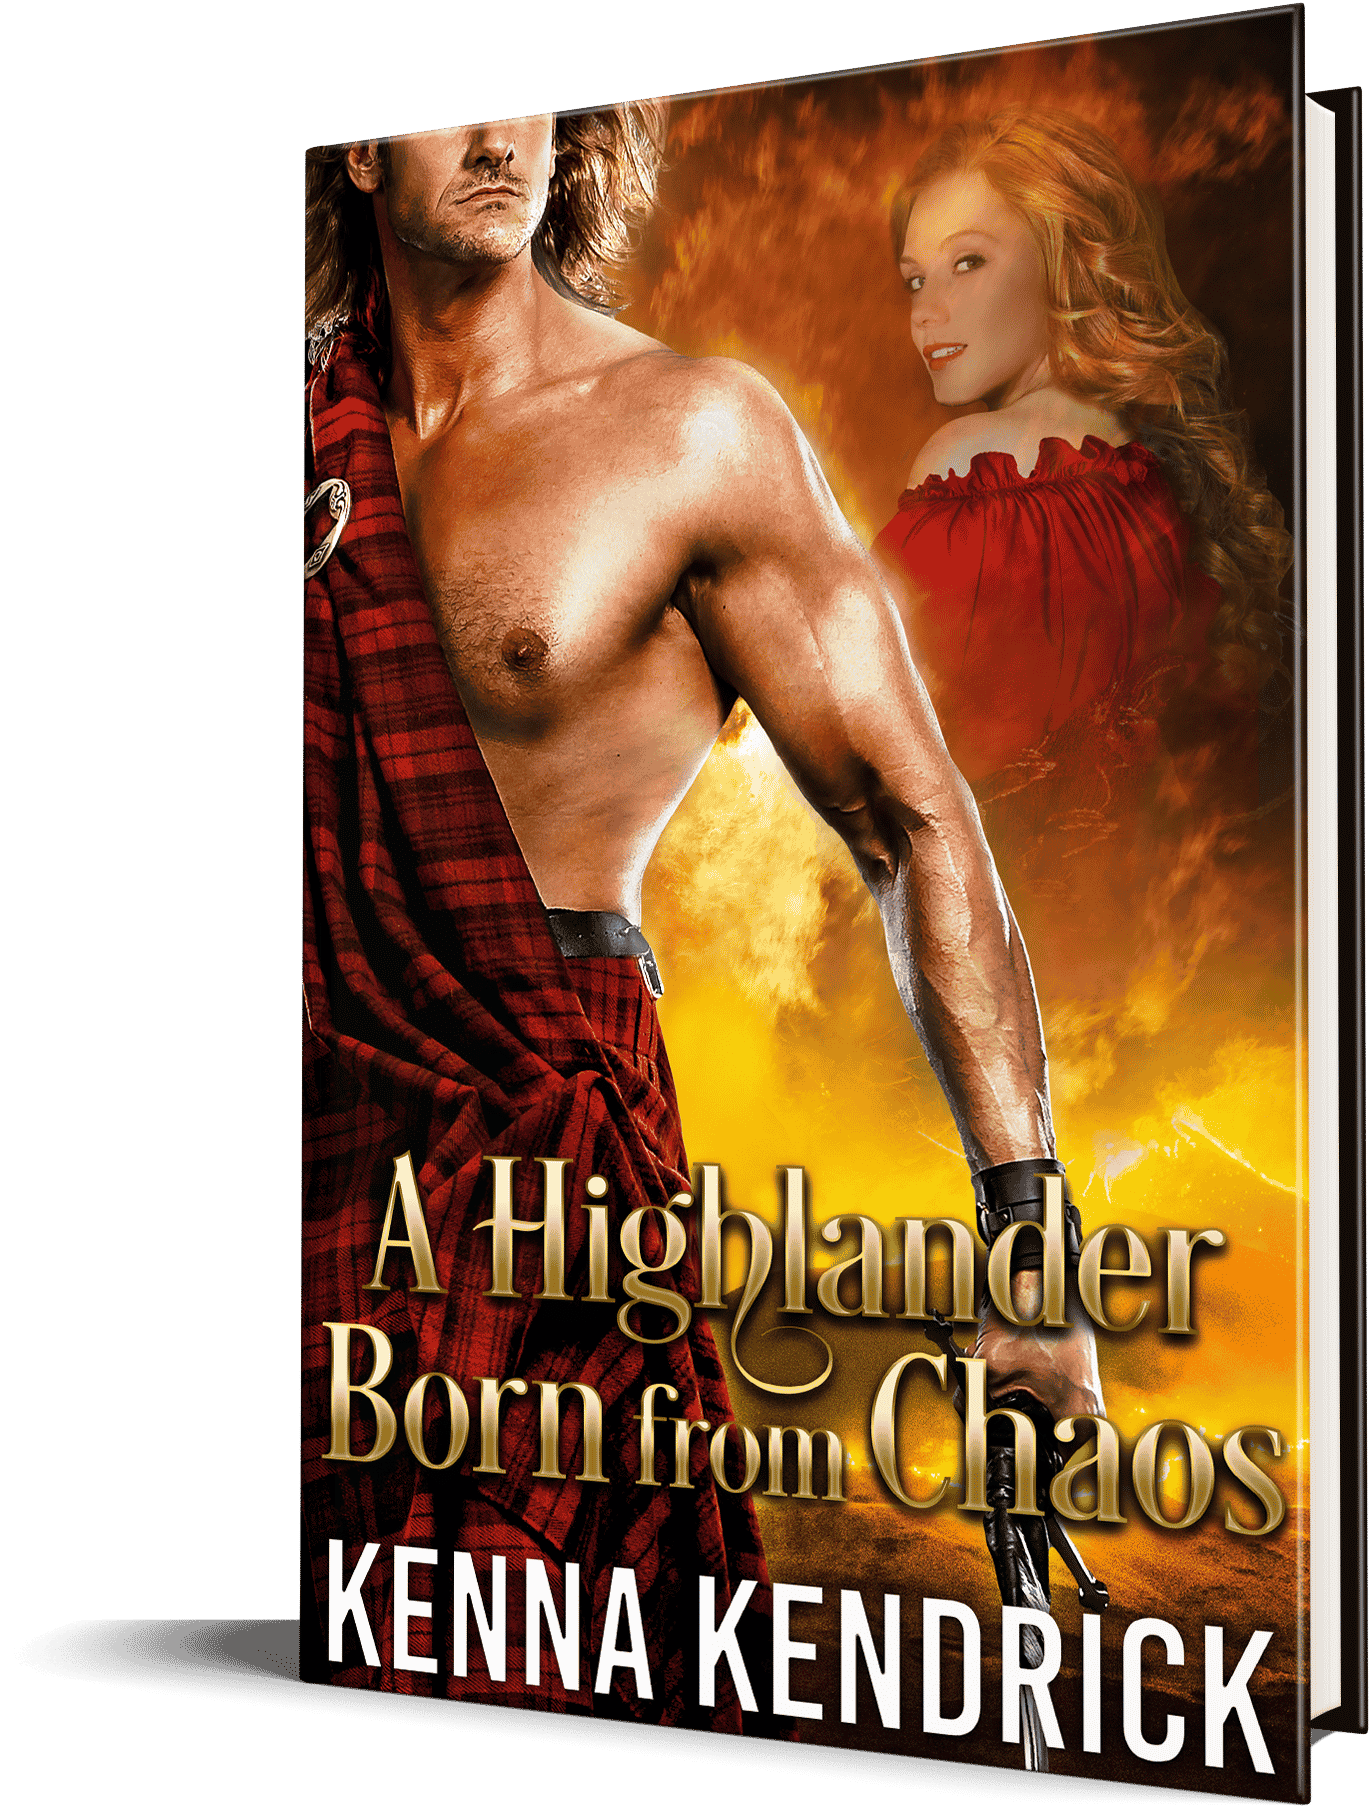 A Highlander Born from Chaos